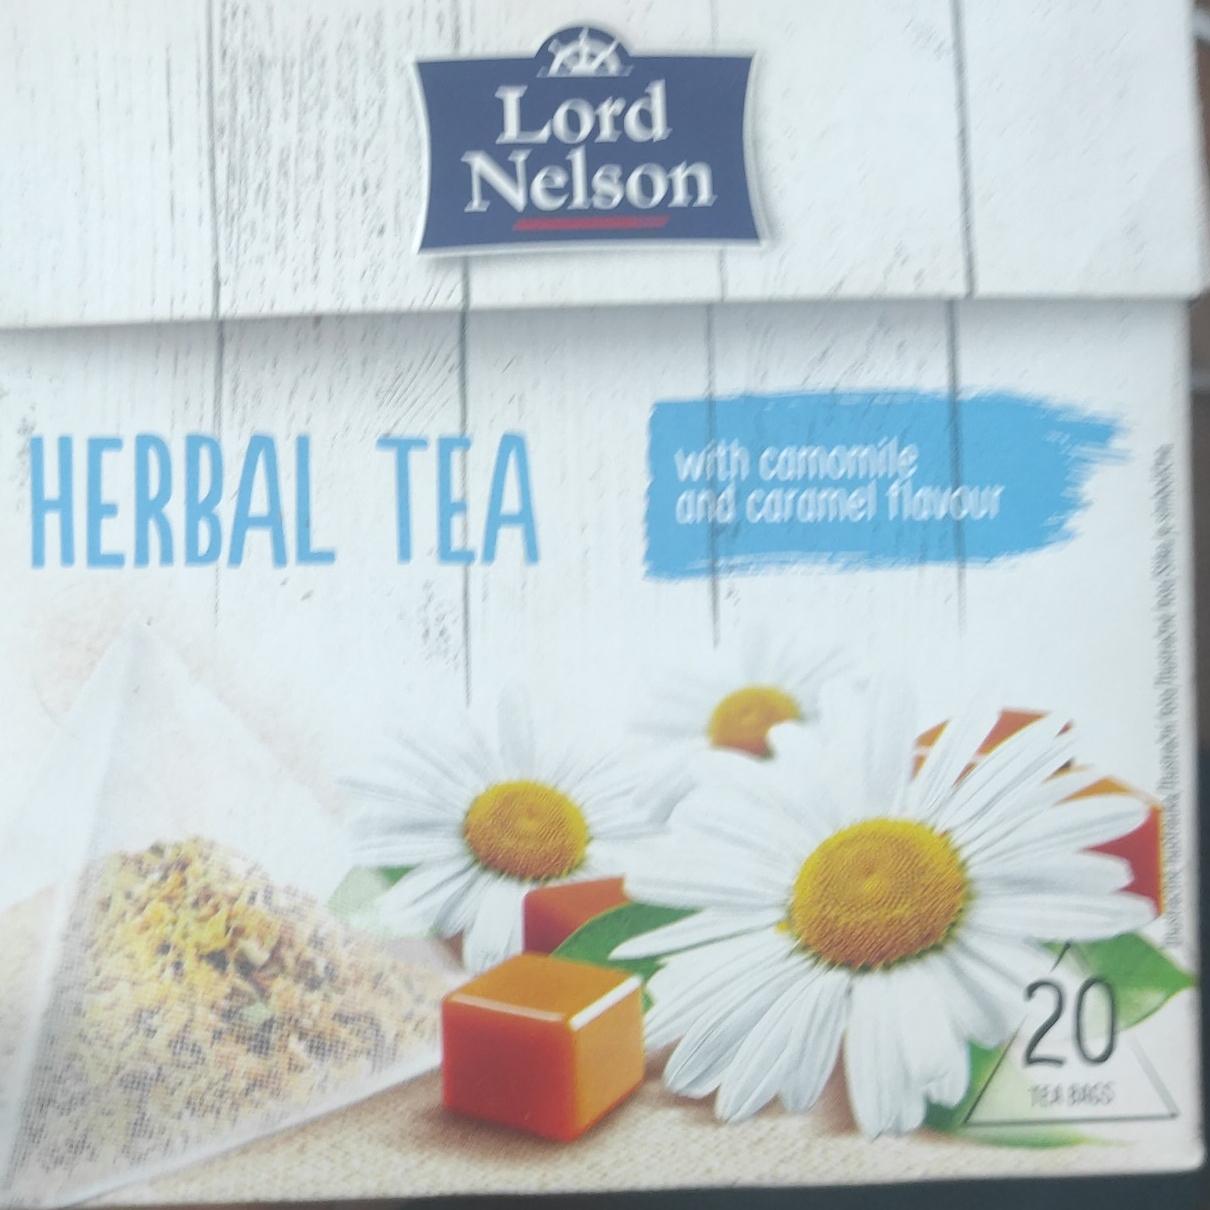 Fotografie - Herbal tea with camomile and caramel flavour Lord Nelson